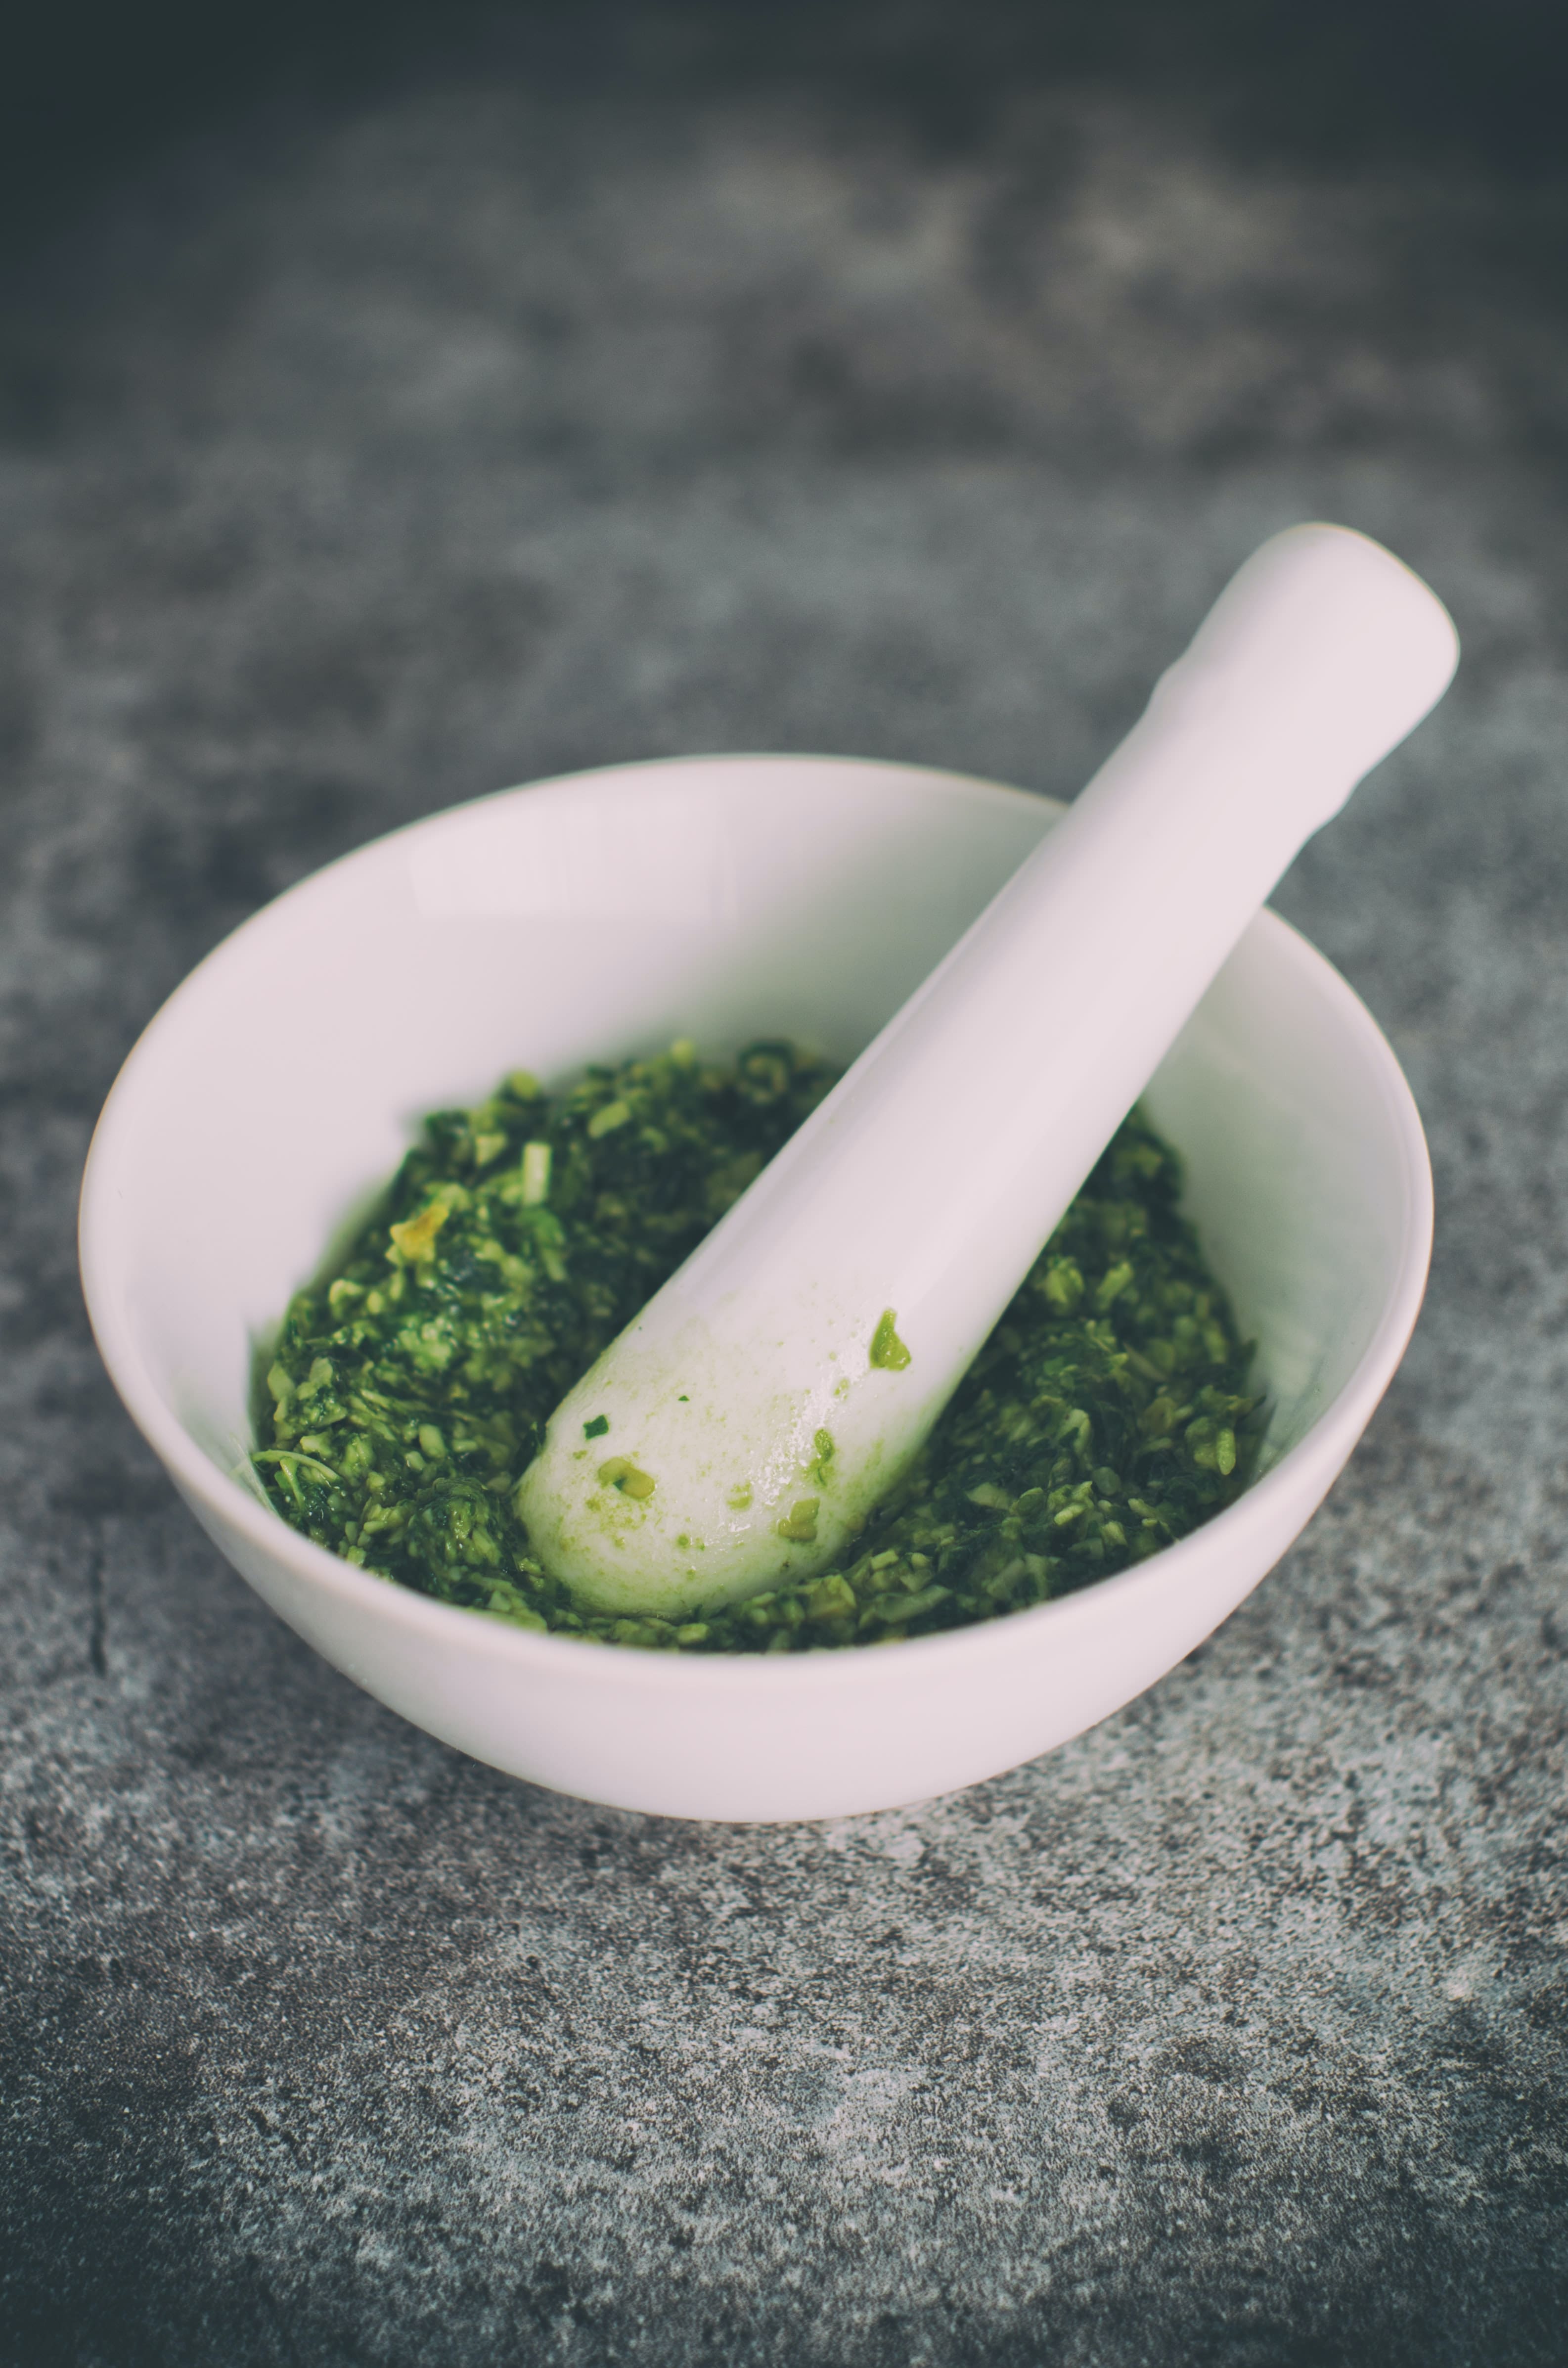 White mortar and pestle full of bright green pesto on a dark countertop; how to preserve fresh herbs